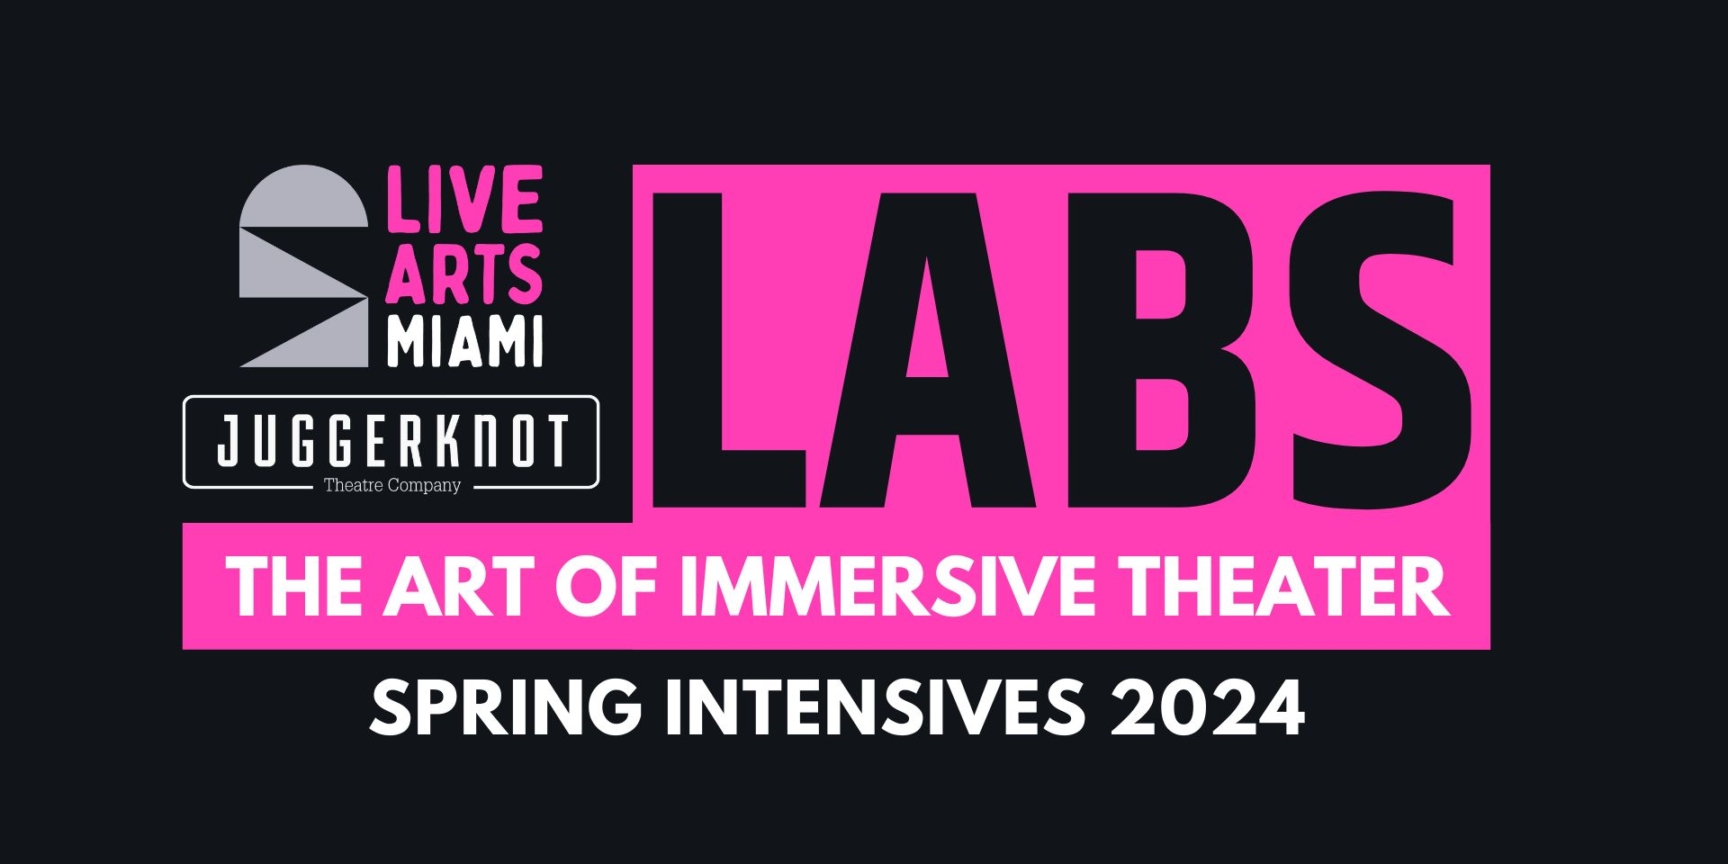 LABS: The Art of Immersive Theater